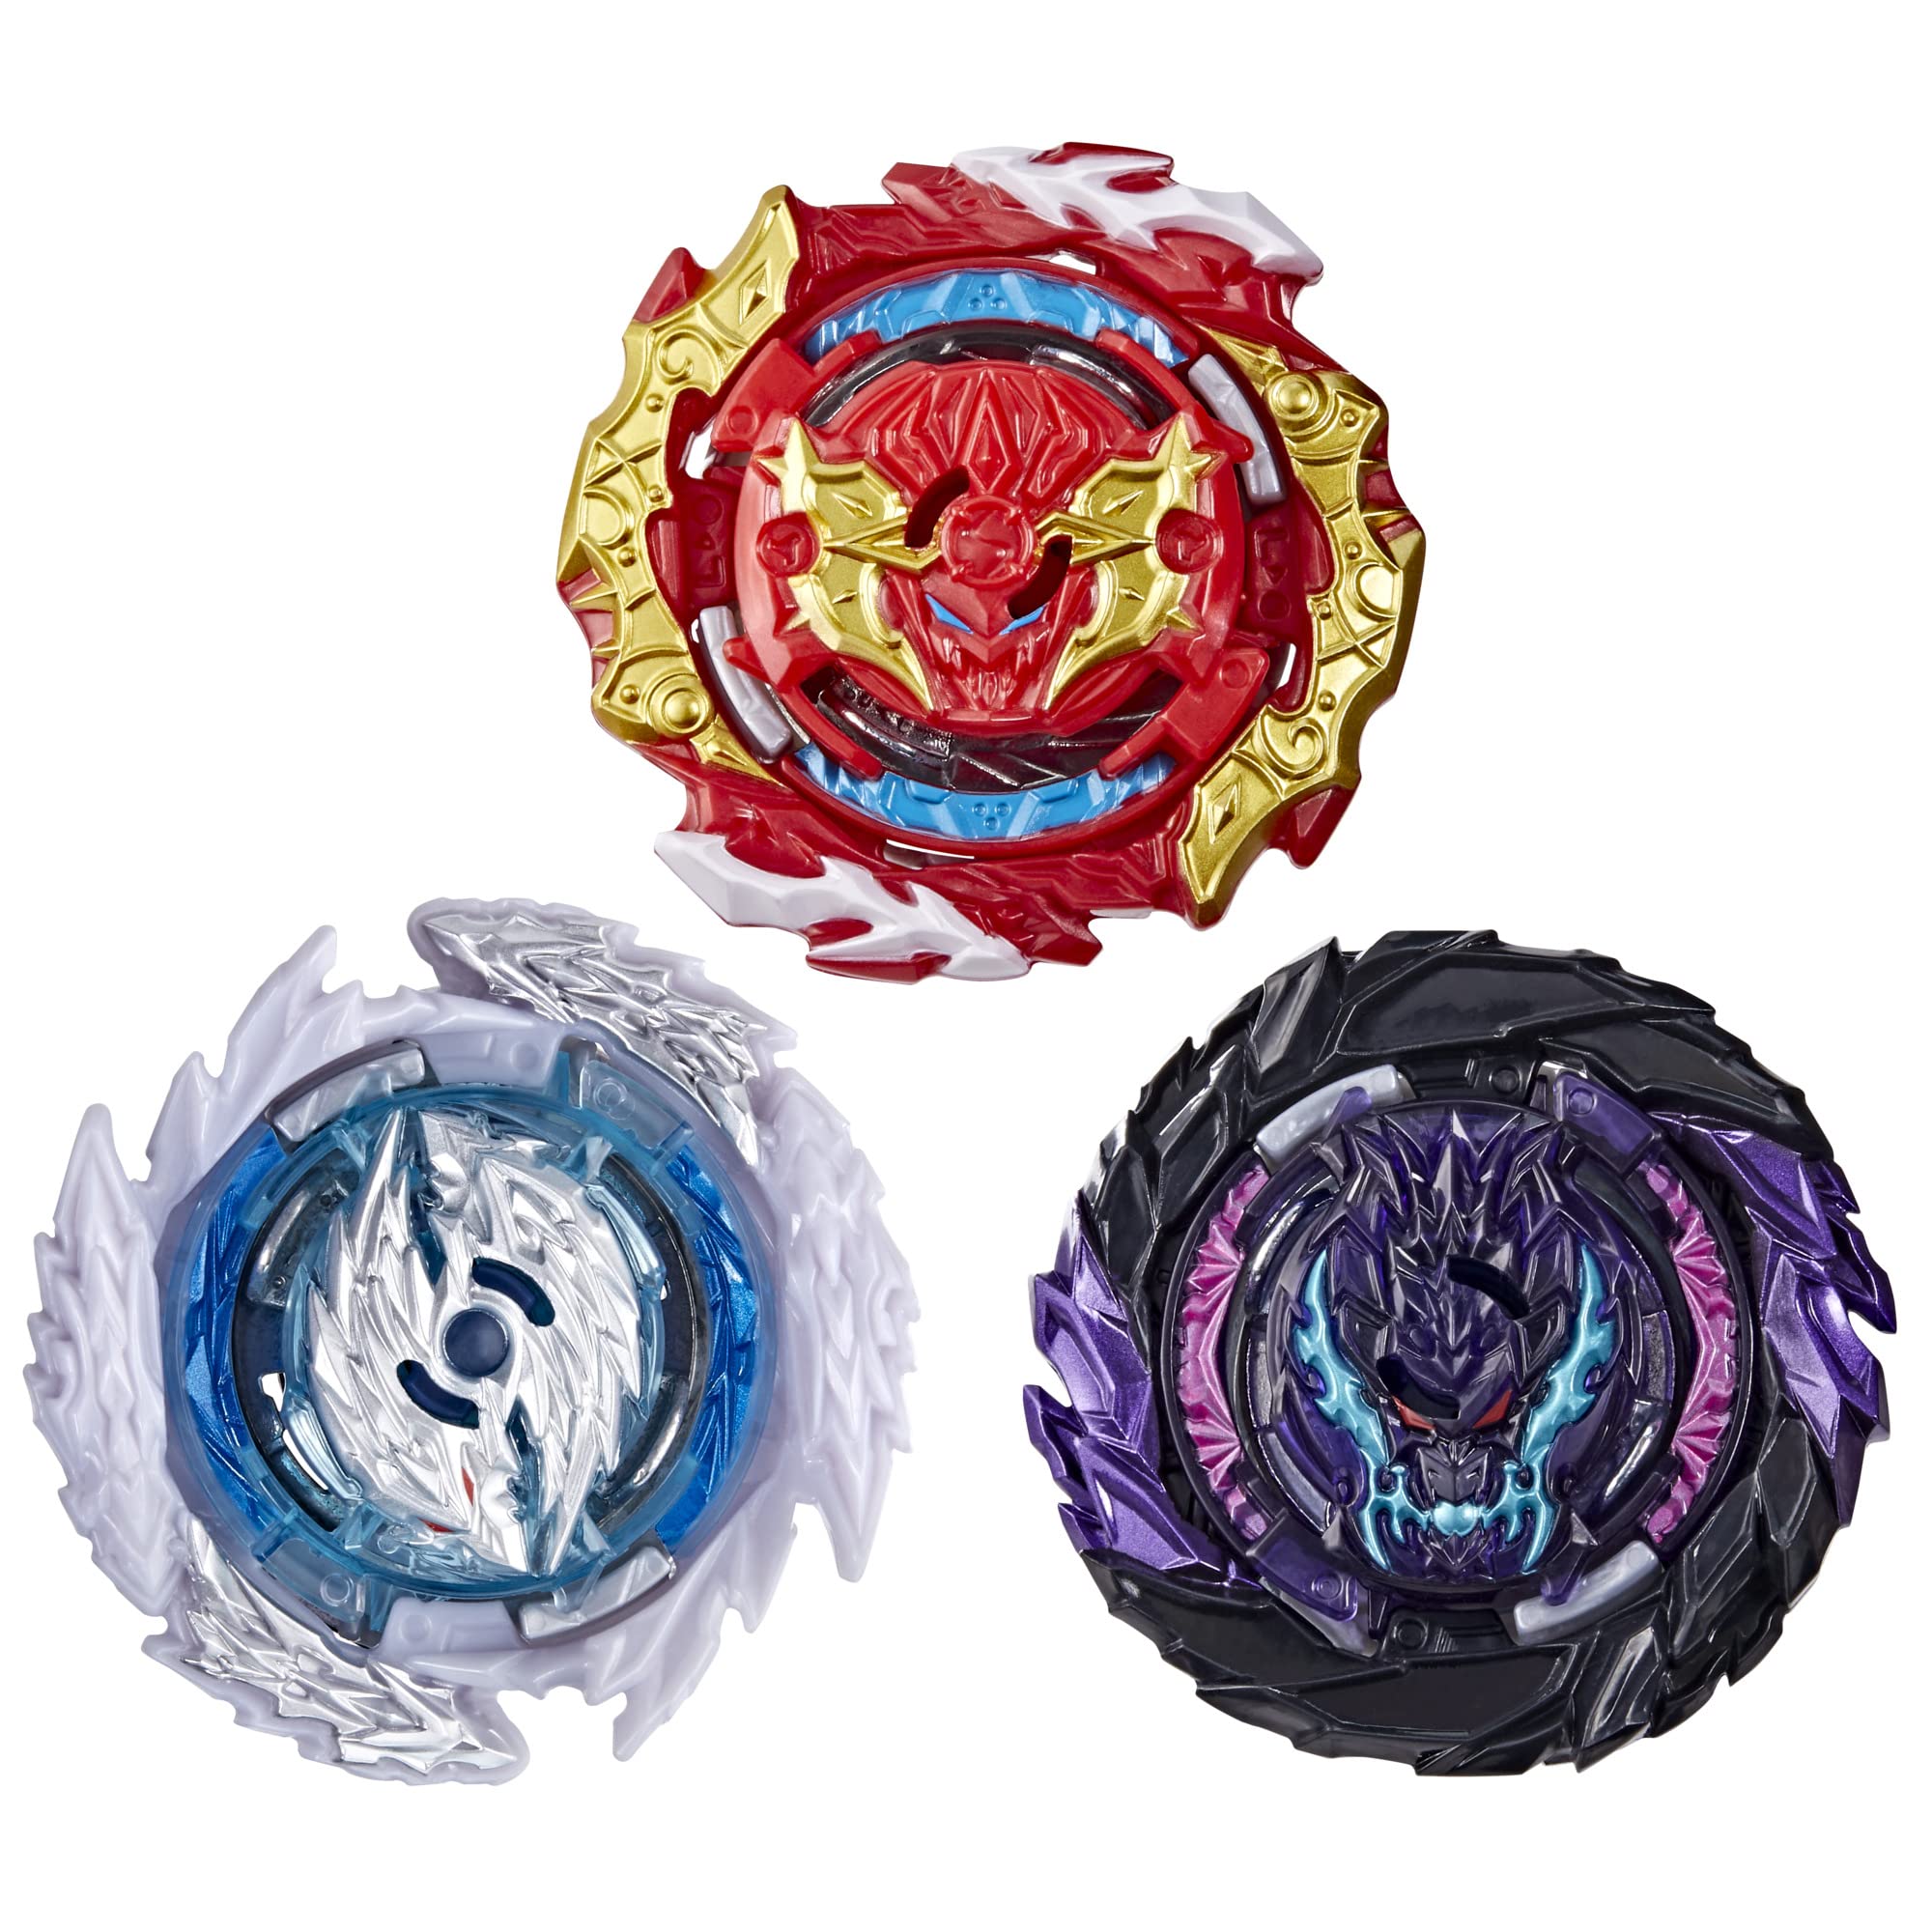 Beyblade Burst QuadDrive Sonic Warp 3-Pack with 3 Spinning Tops, Battling Game Top Toys for Kids Ages 8 and Up